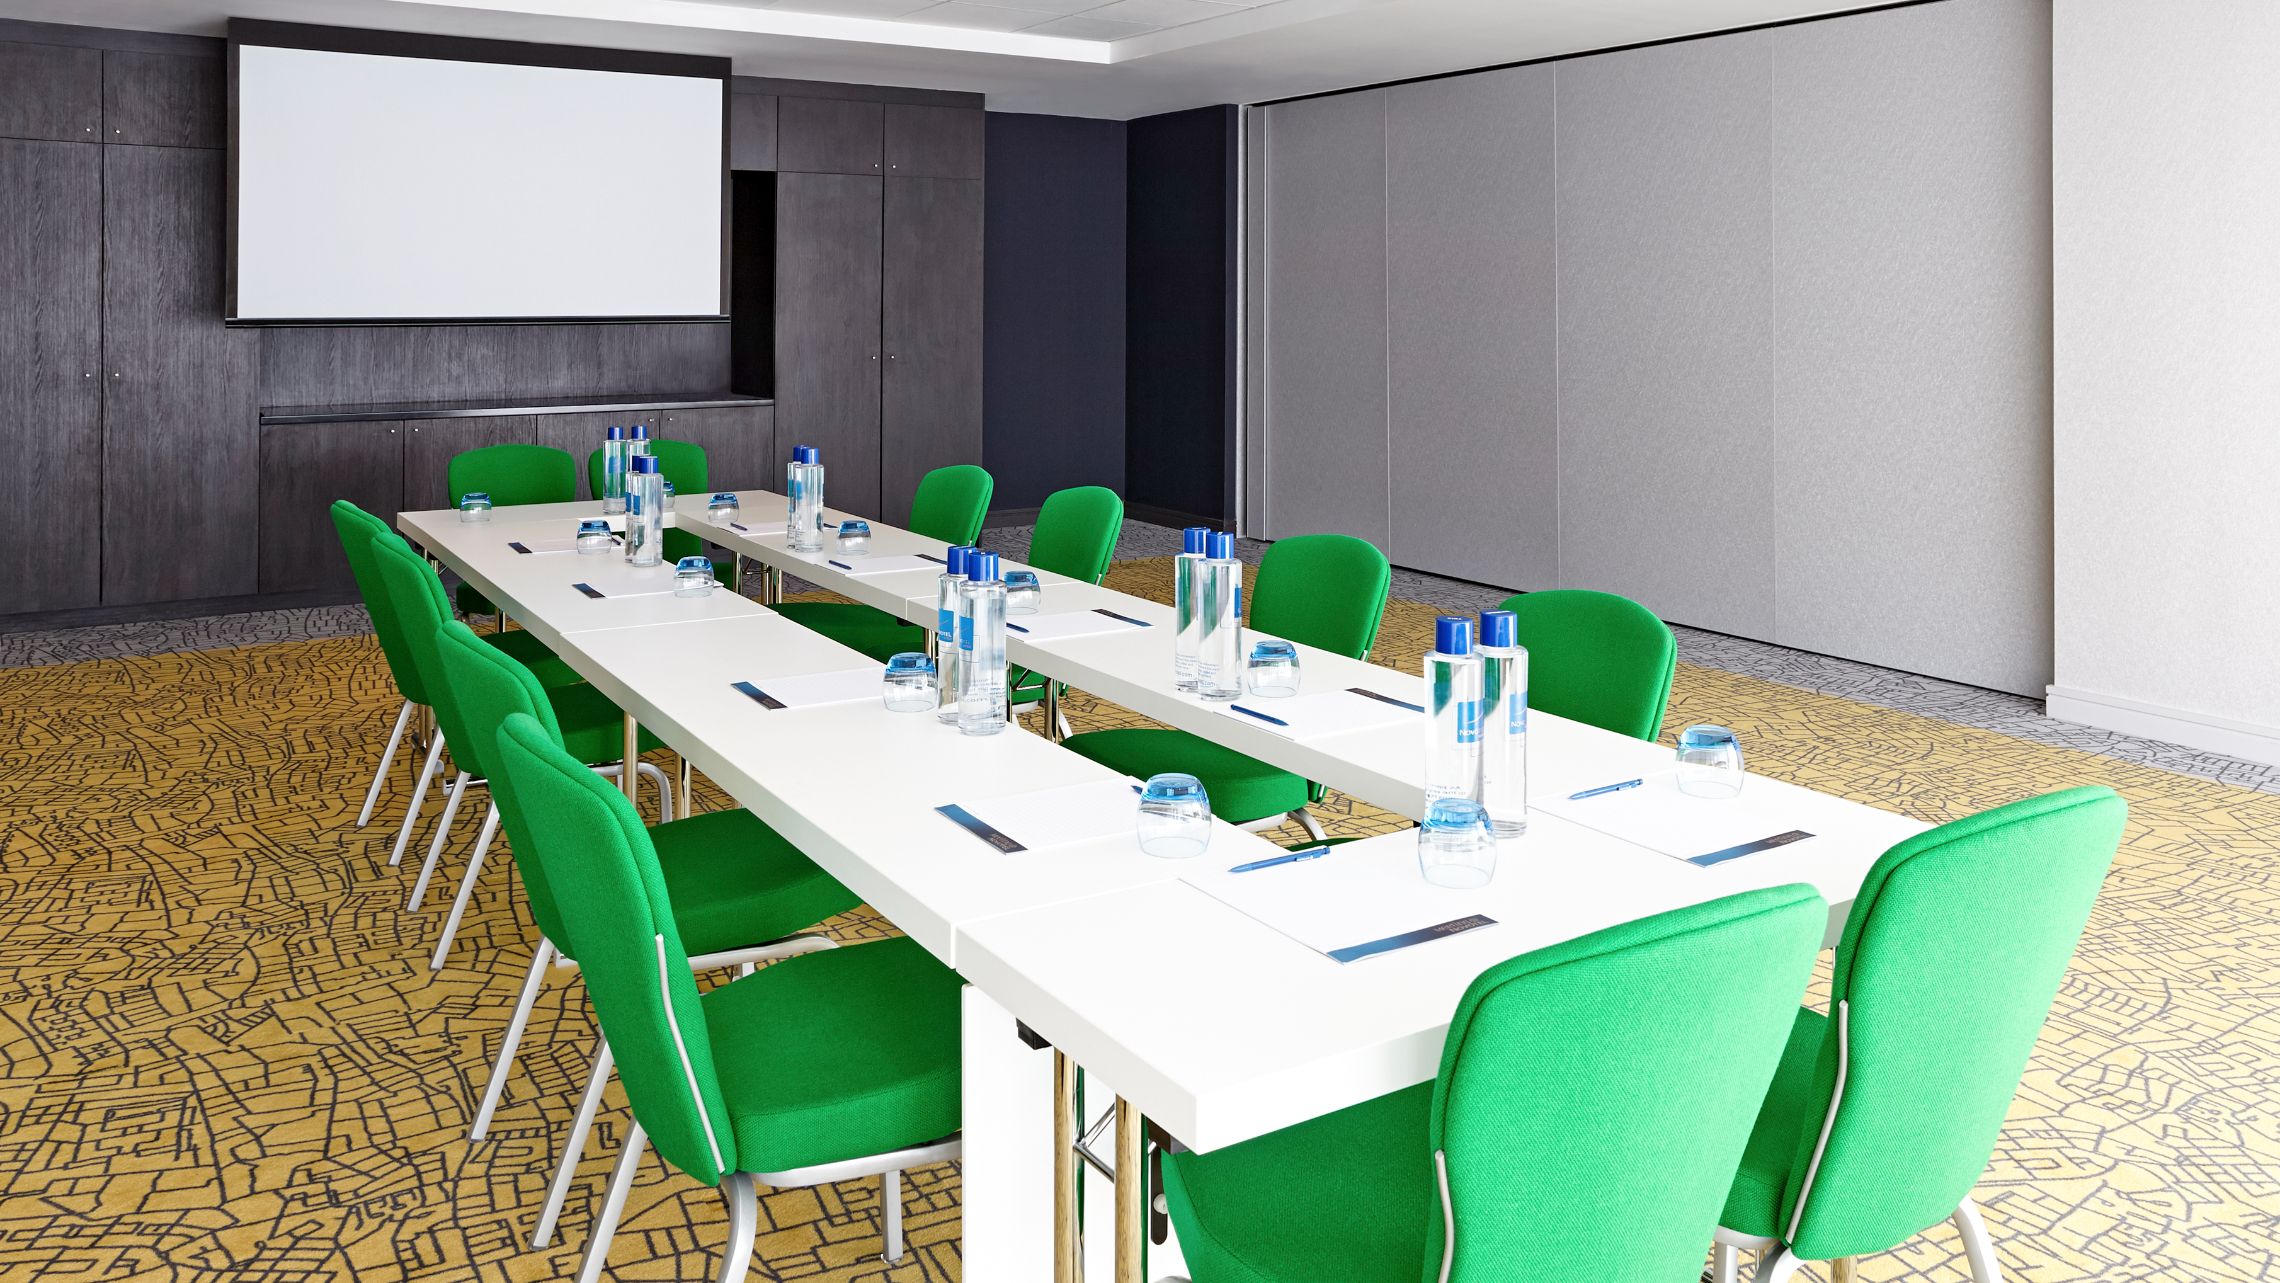 Meeting Room of the Novotel Property Development in London